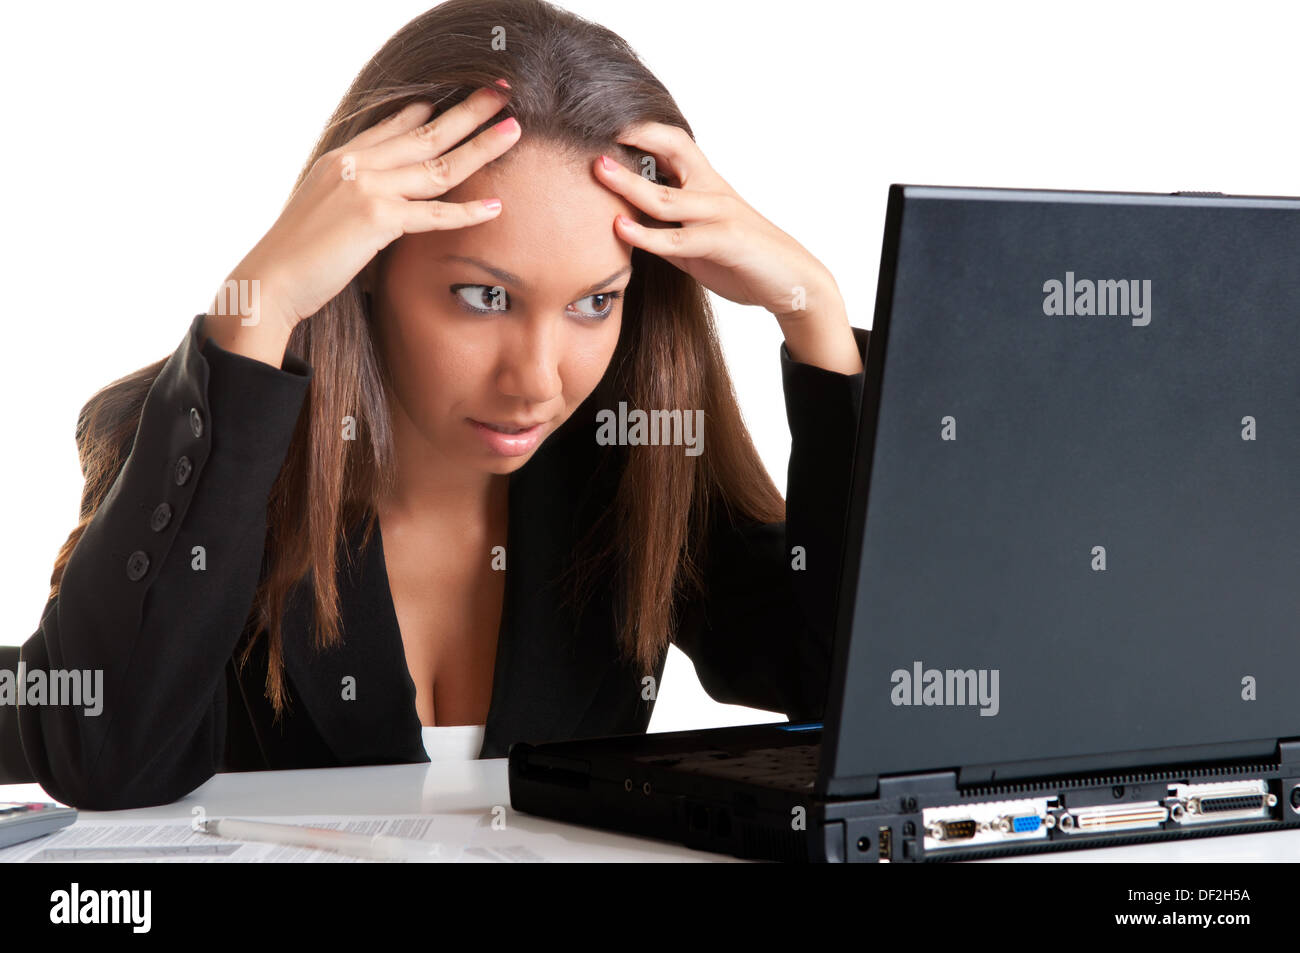 Worried businesswoman looking at a computer screen, isolated in white Stock Photo